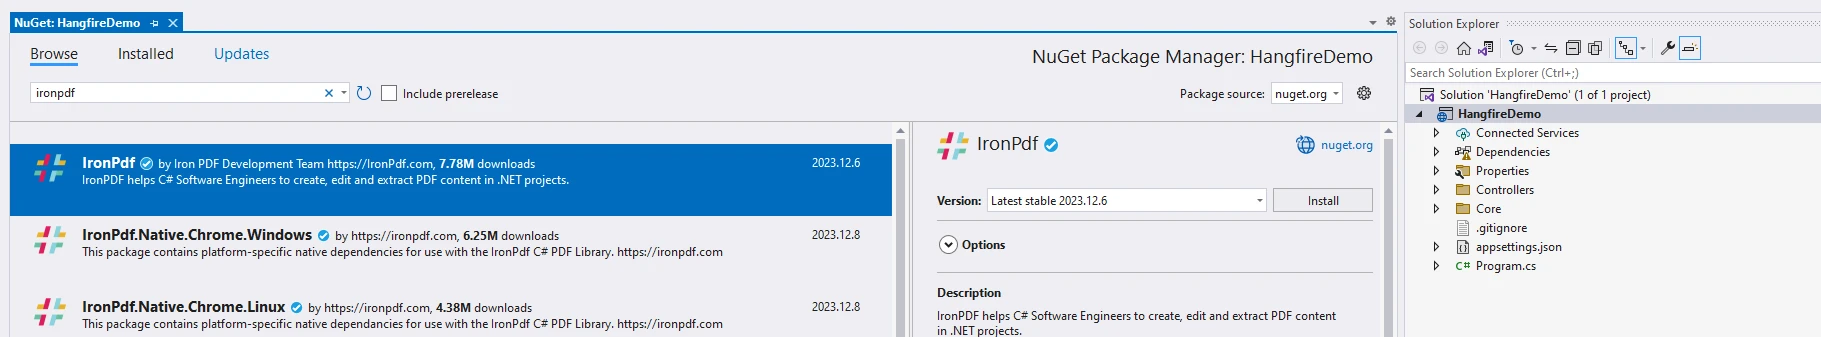 How to Convert Color PDFs to Grayscale: Figure 11 - Installing IronPDF with the NuGet package manager